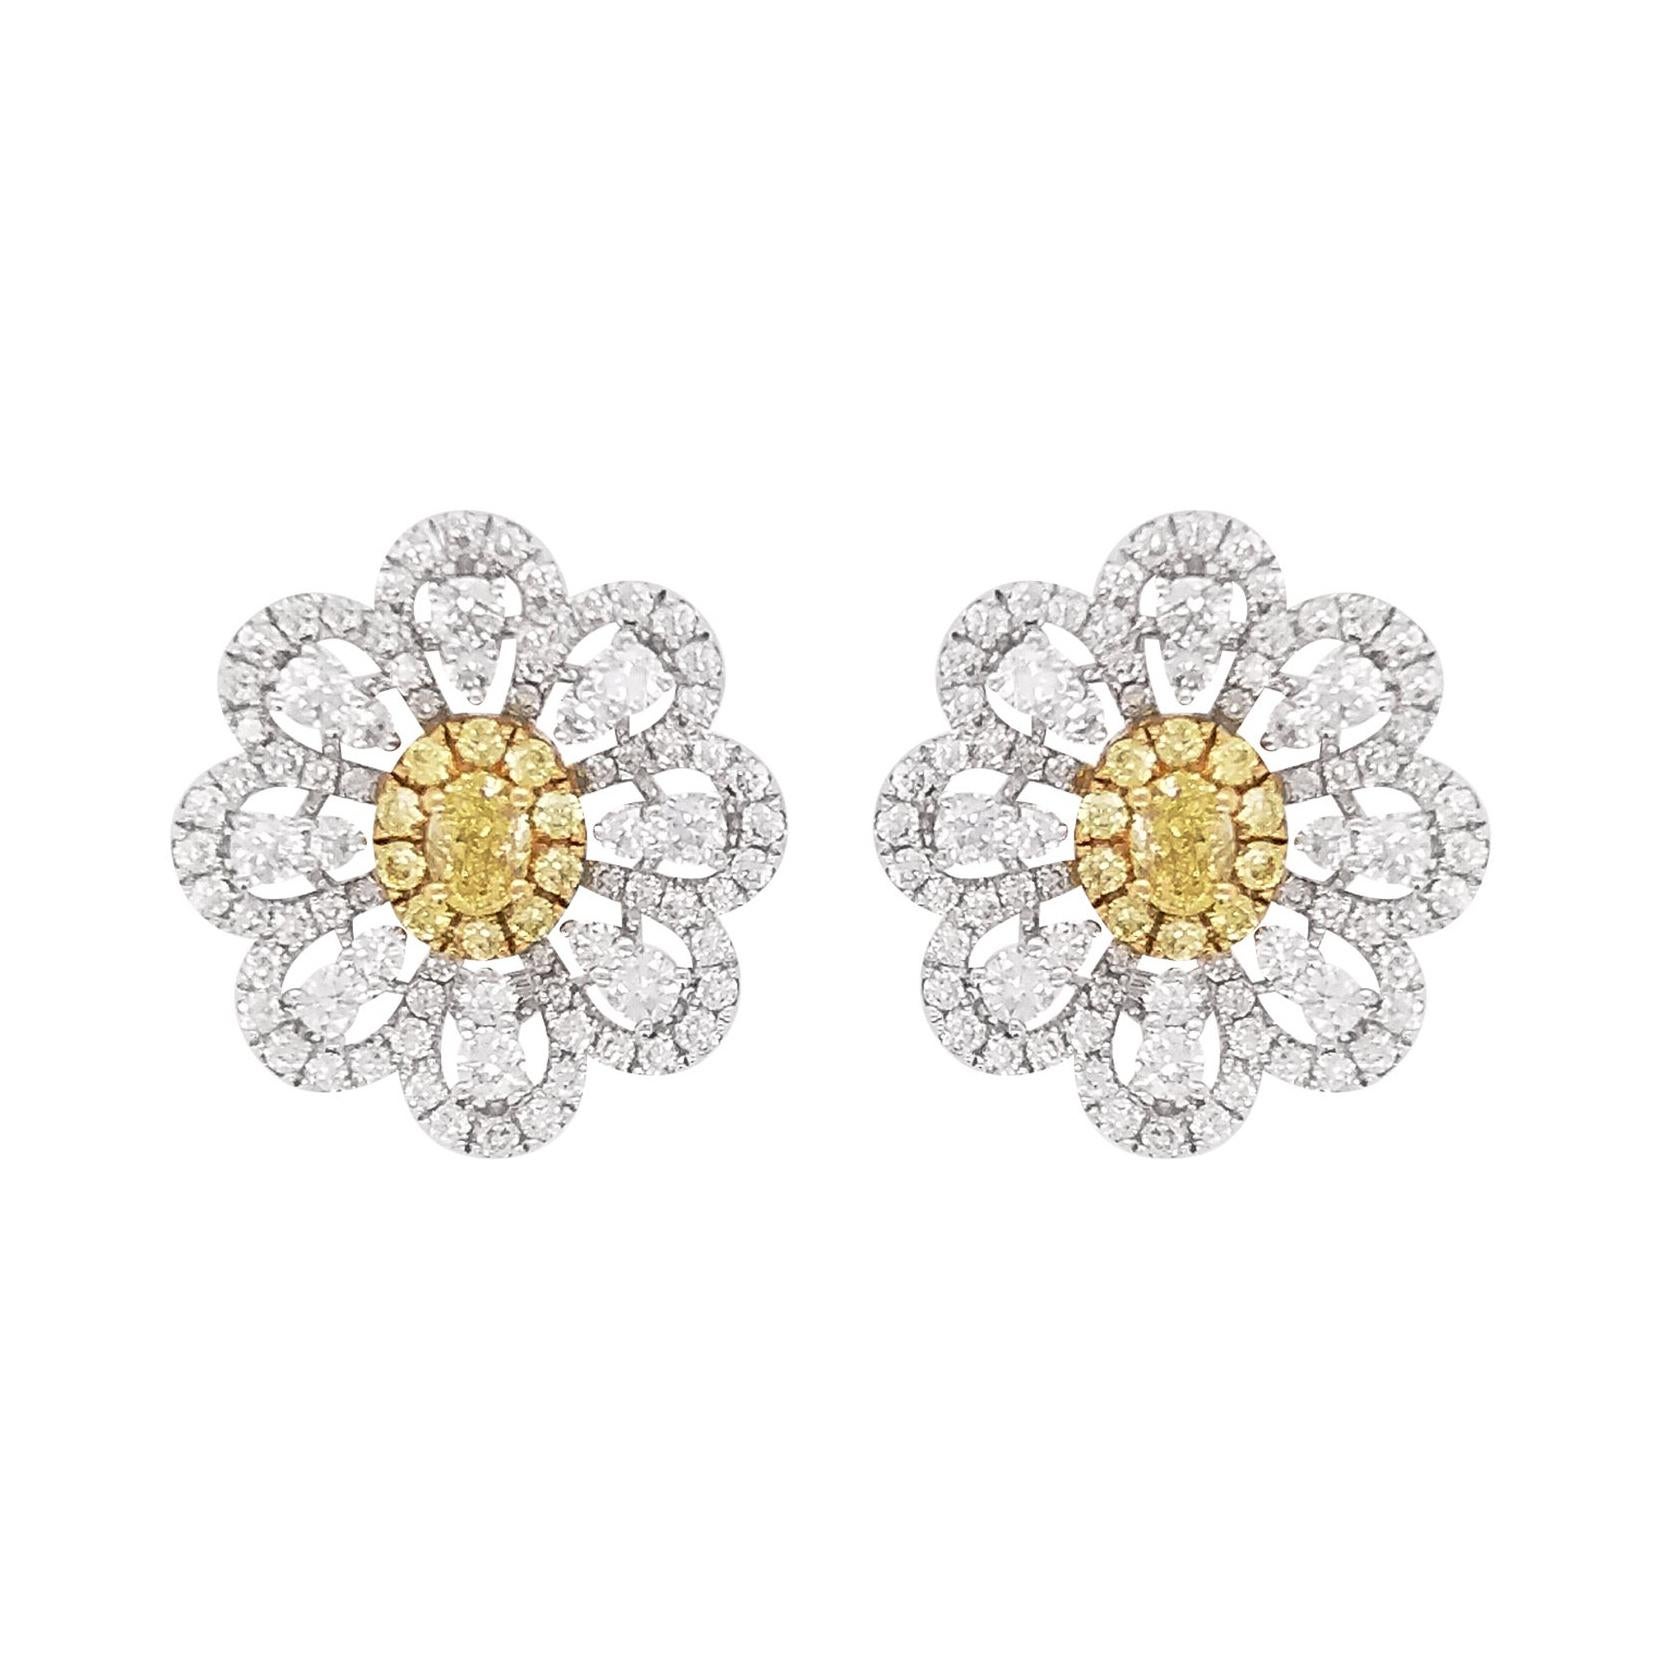 Certified Yellow Diamond and White Diamond in 18K Gold Clip Earrings